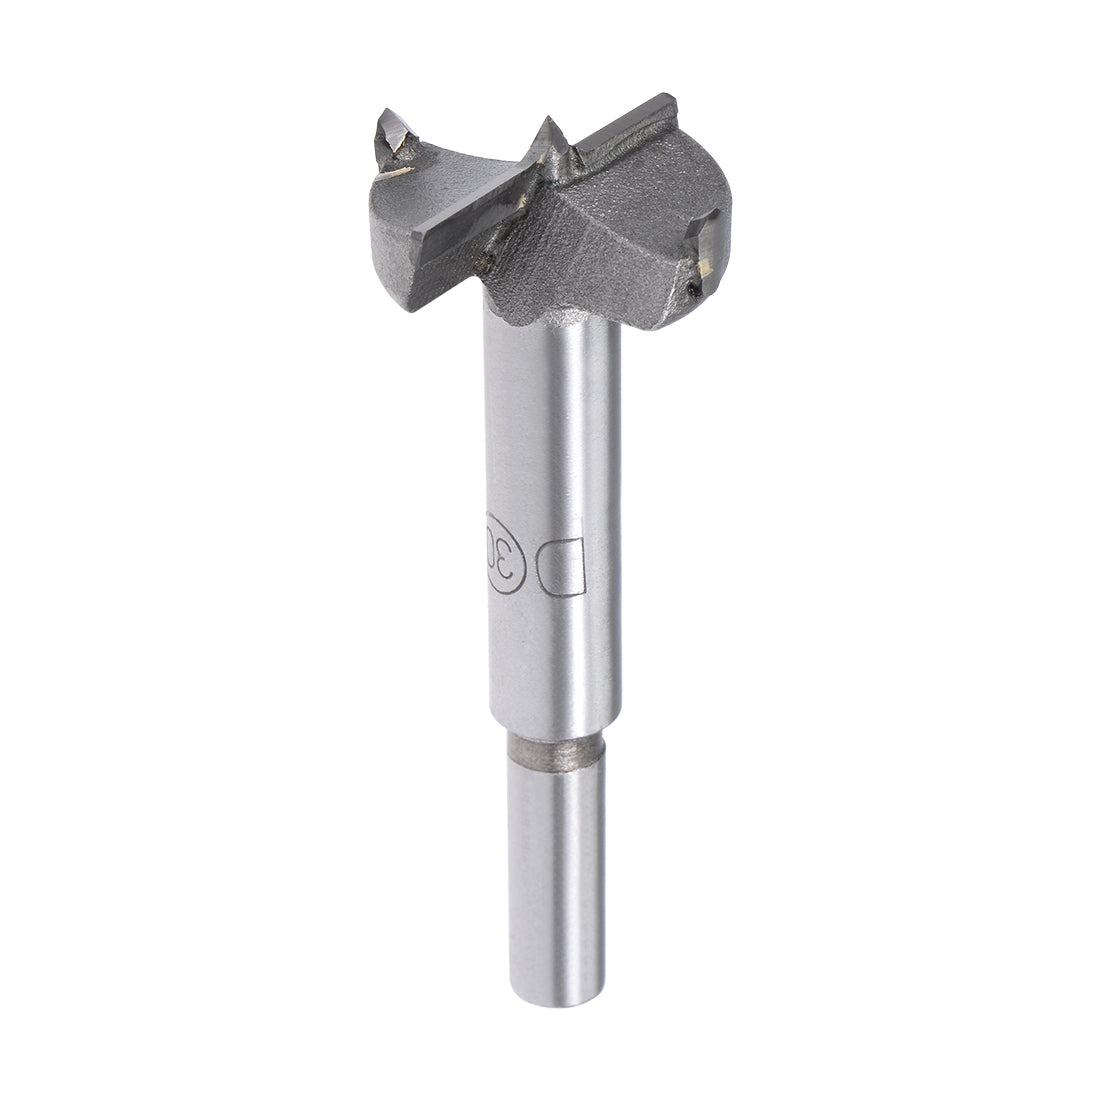 uxcell Uxcell Forstner Wood Boring Drill Bits 30mm Dia. Hole Saw Carbide Tip 8mm Round Shank Cutting for Hinge Plywood MDF CNC Tool